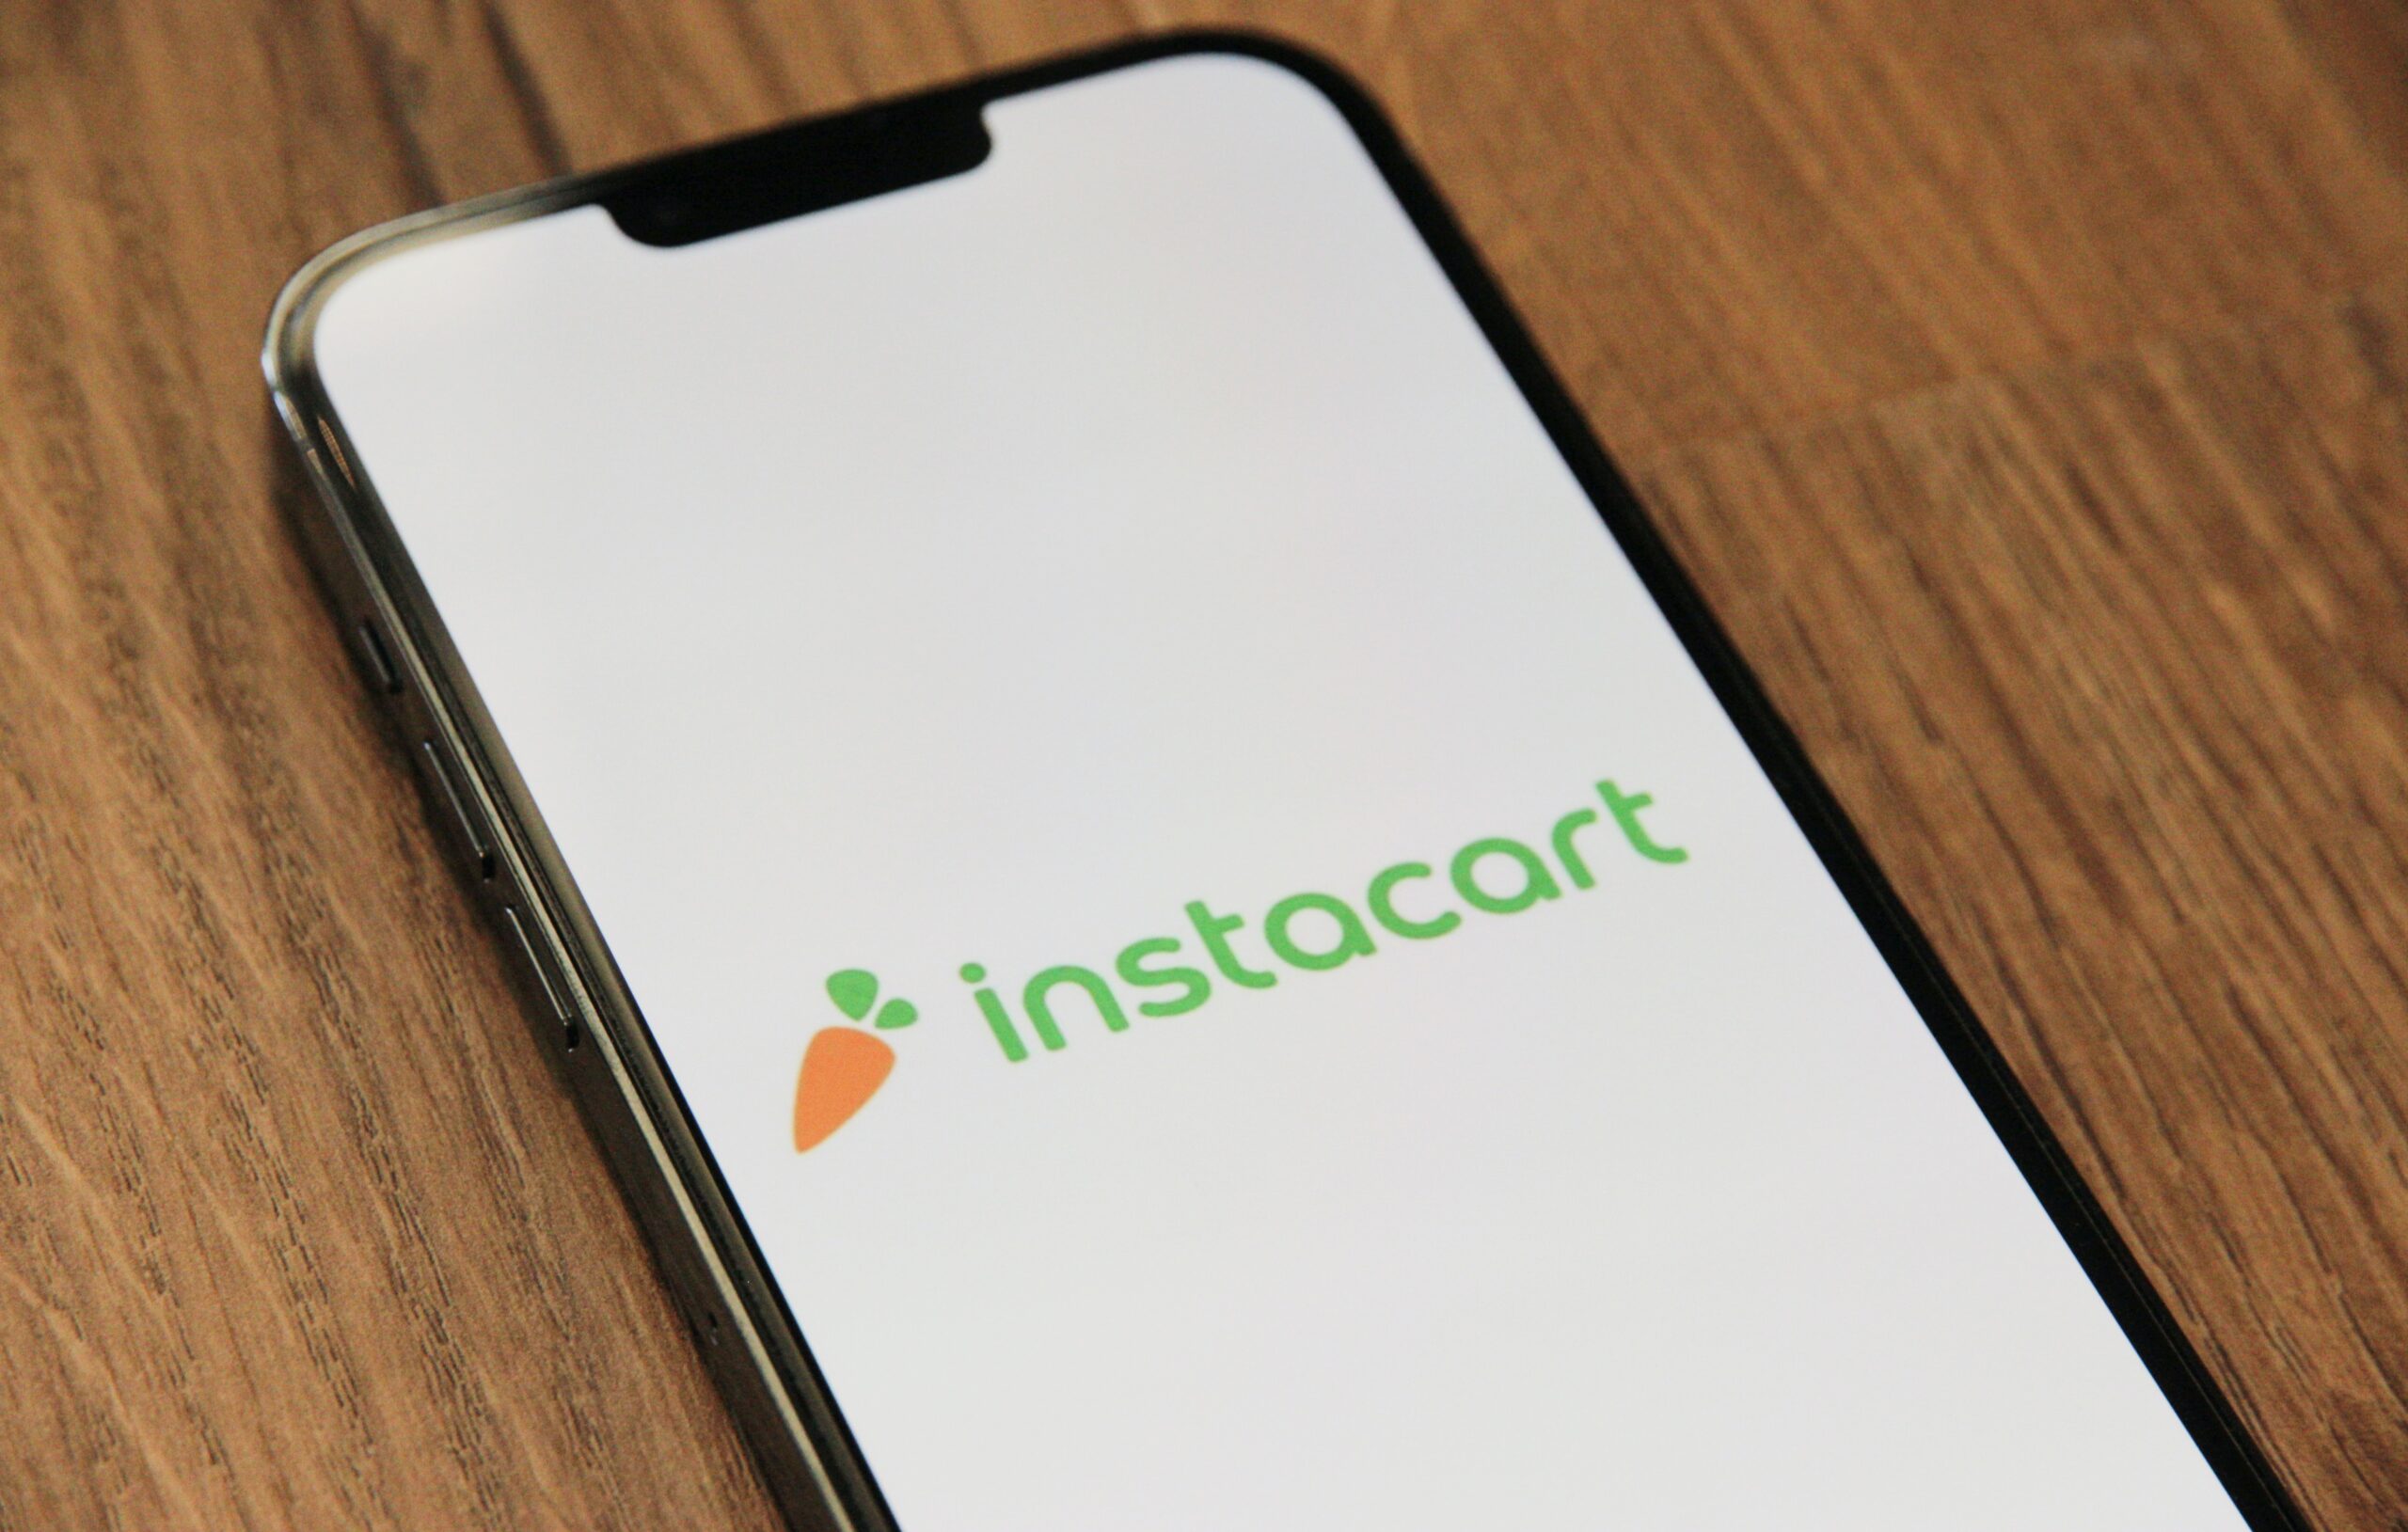 What Is Instacart and How Does It Work? (Pros, Cons & Cost)